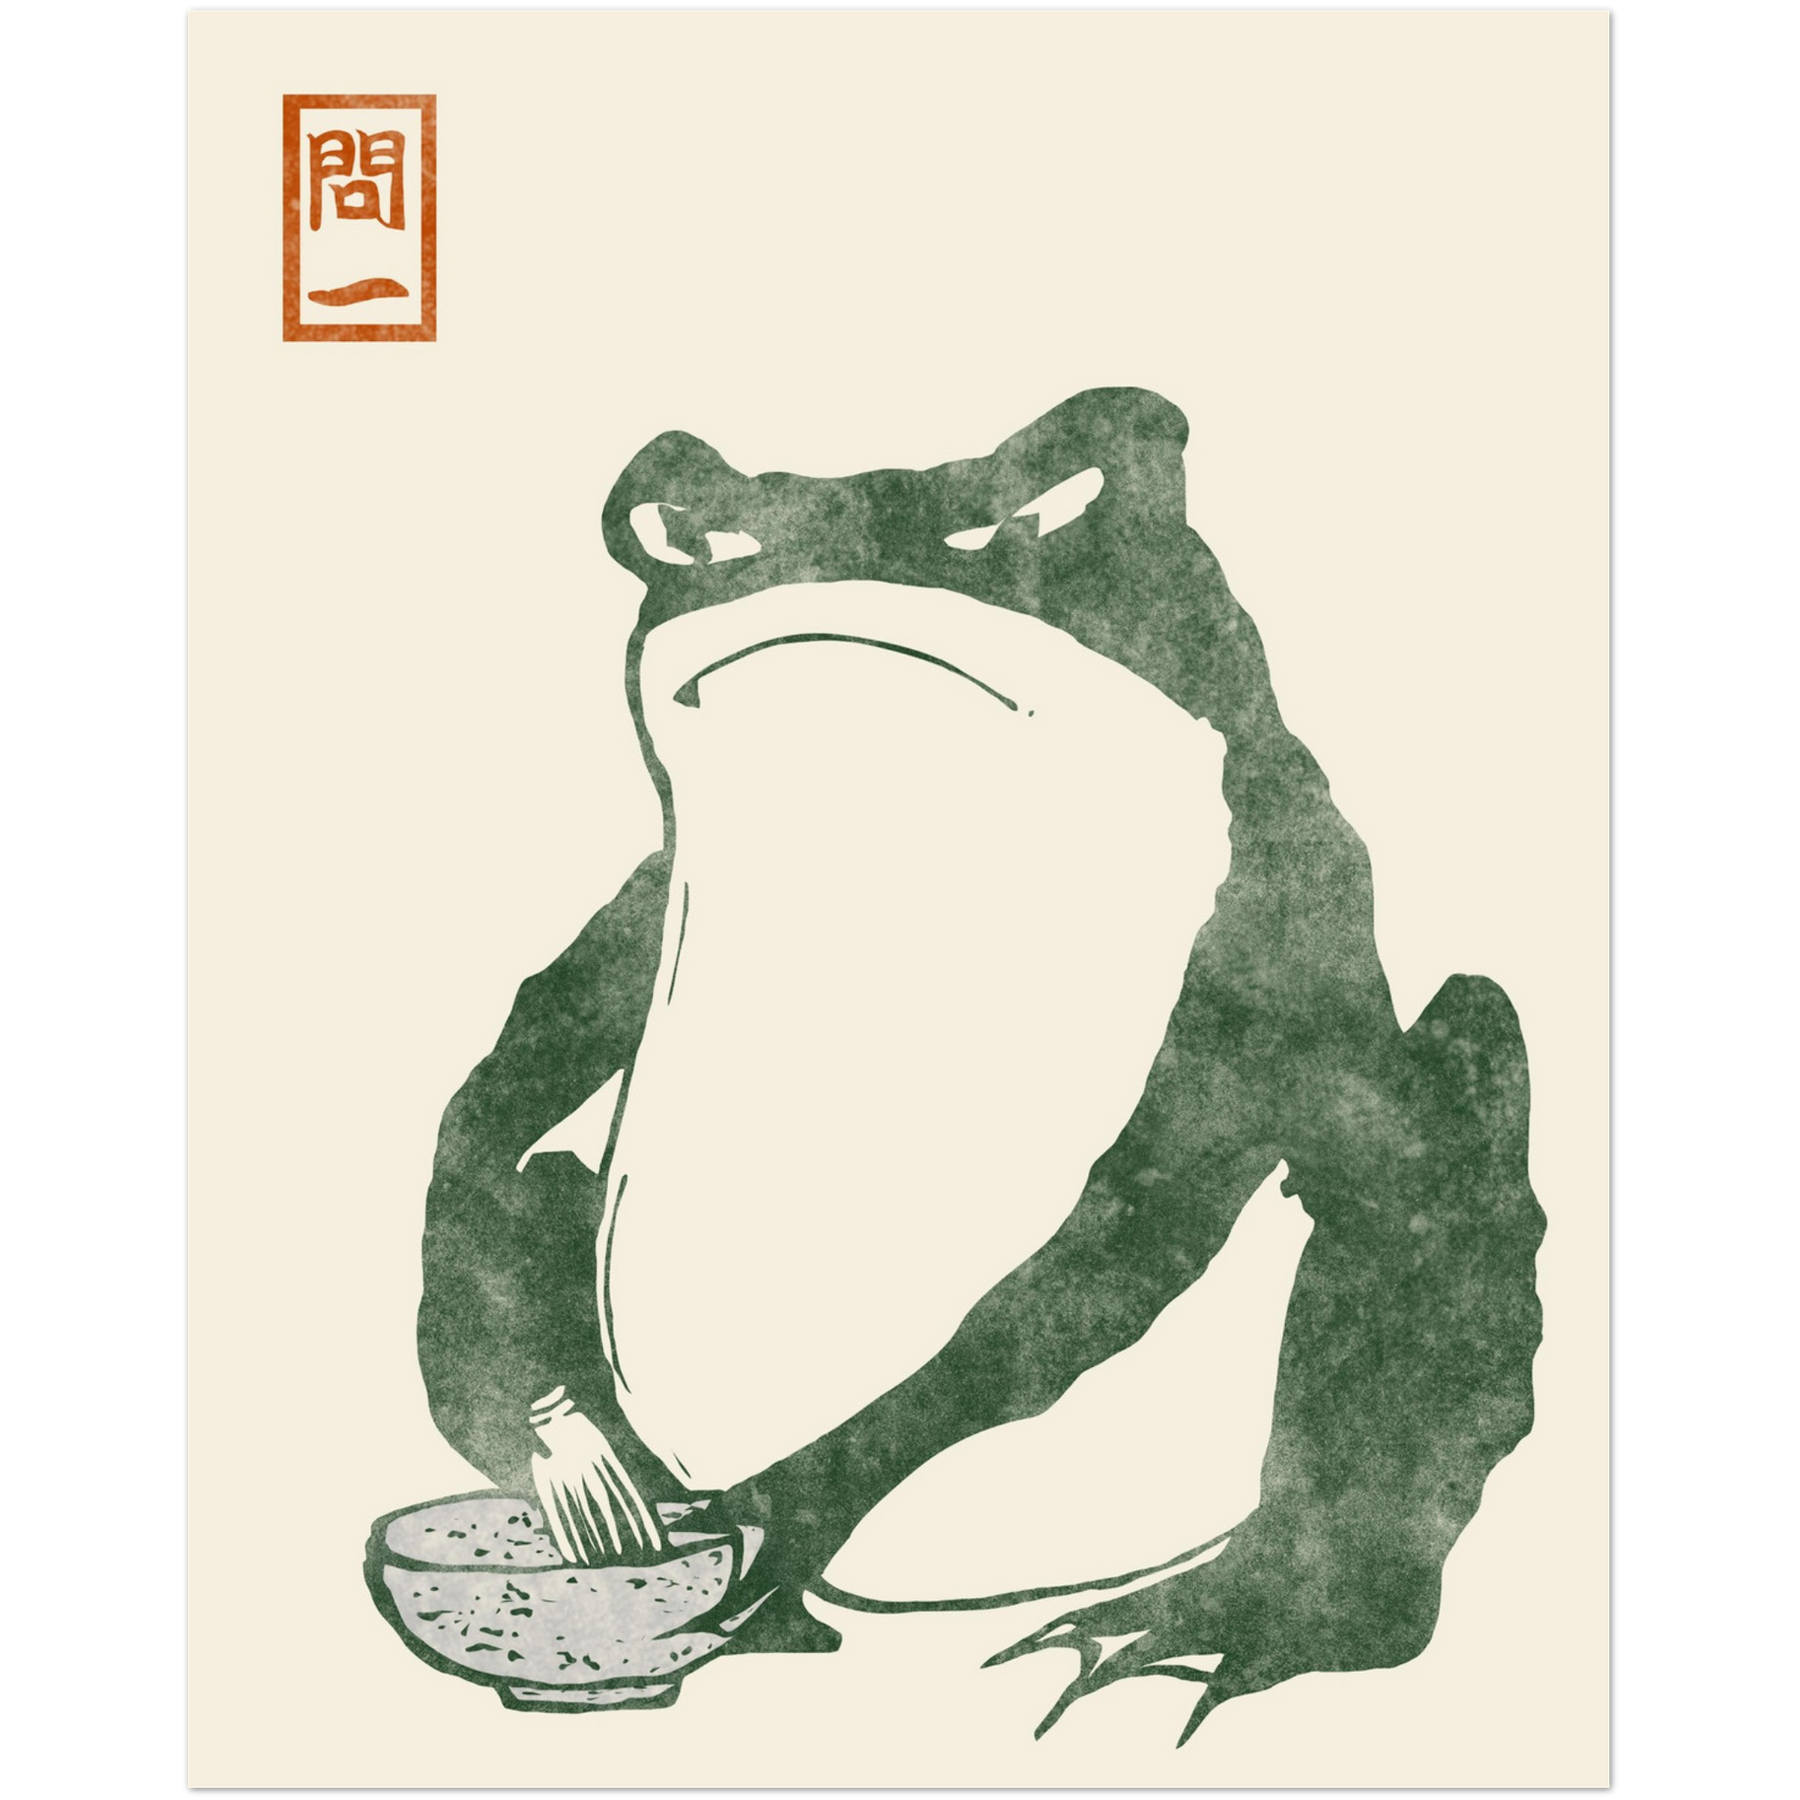 Frog and Toad Fishing | Art Print